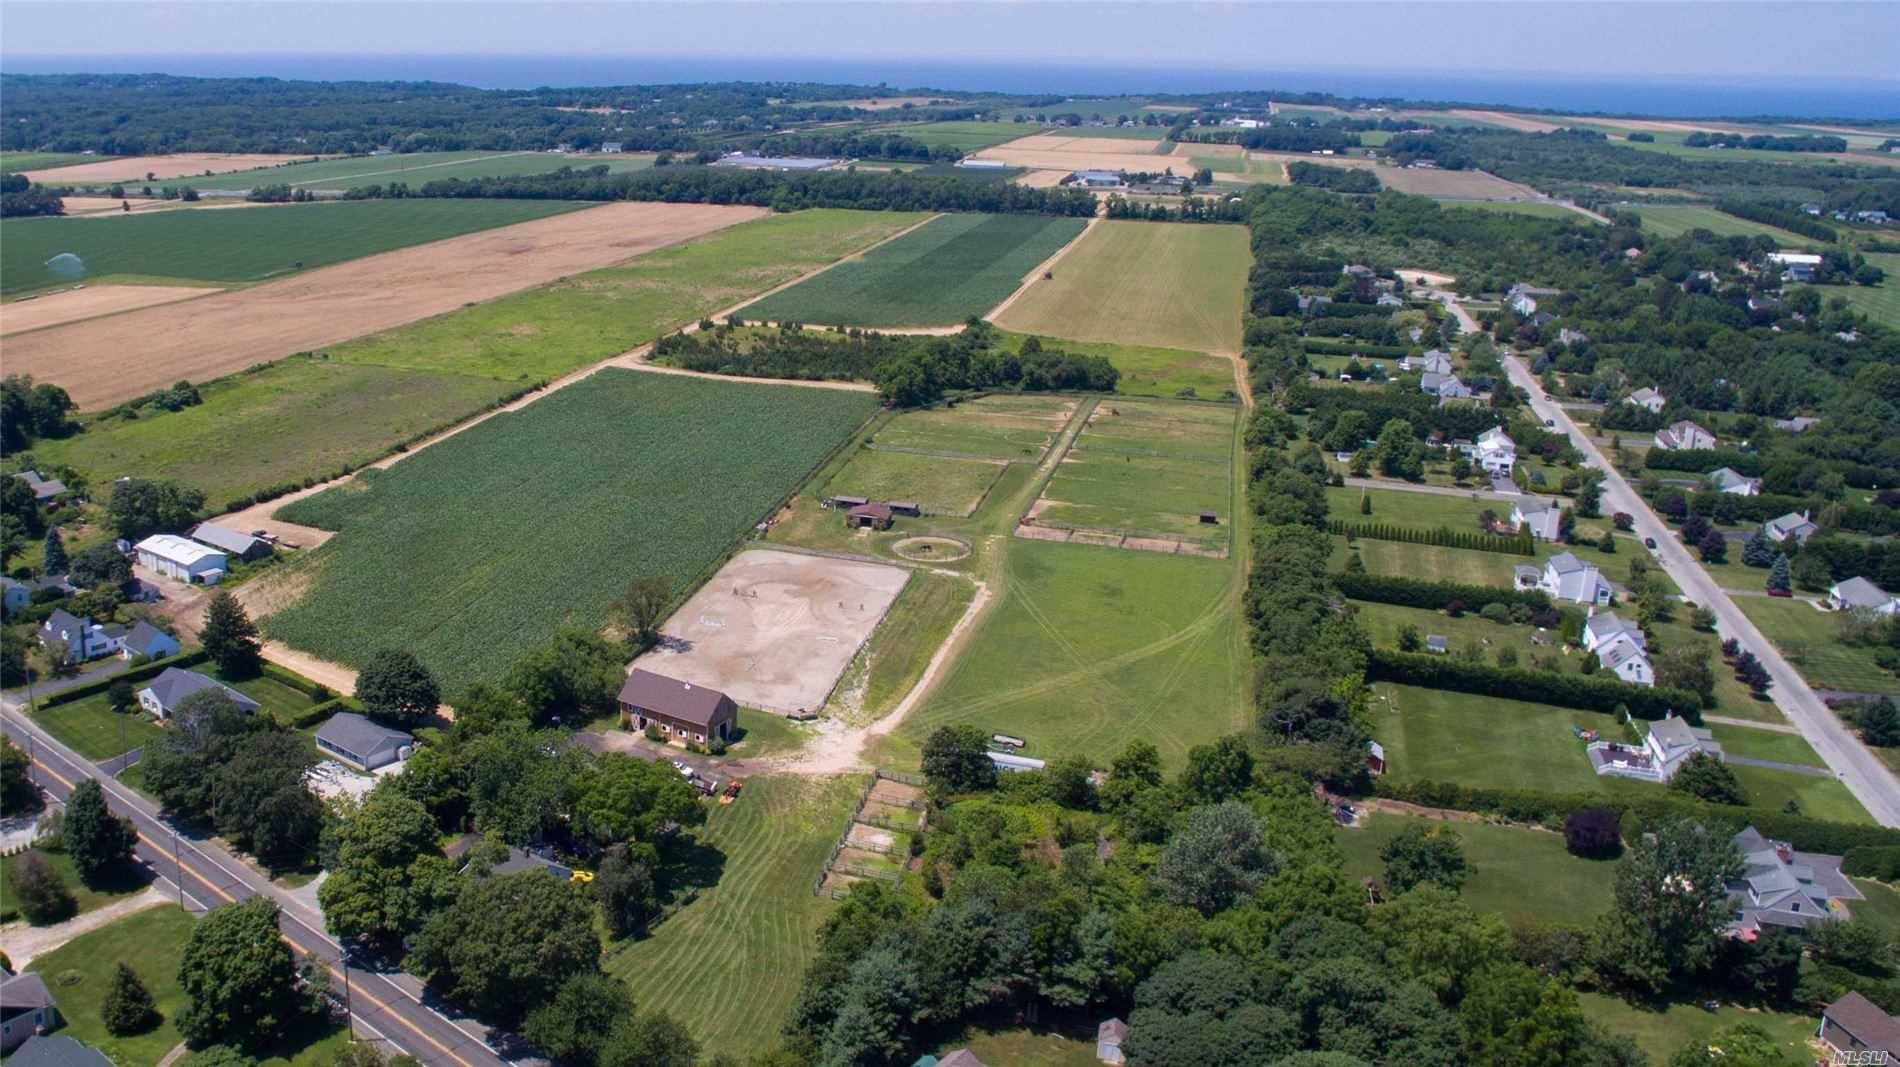 24 Acre In Mattituck Can be subdivided into two lots, one 10acre Drs along with a 1 acre DRI lot can be split from the 24 acres.